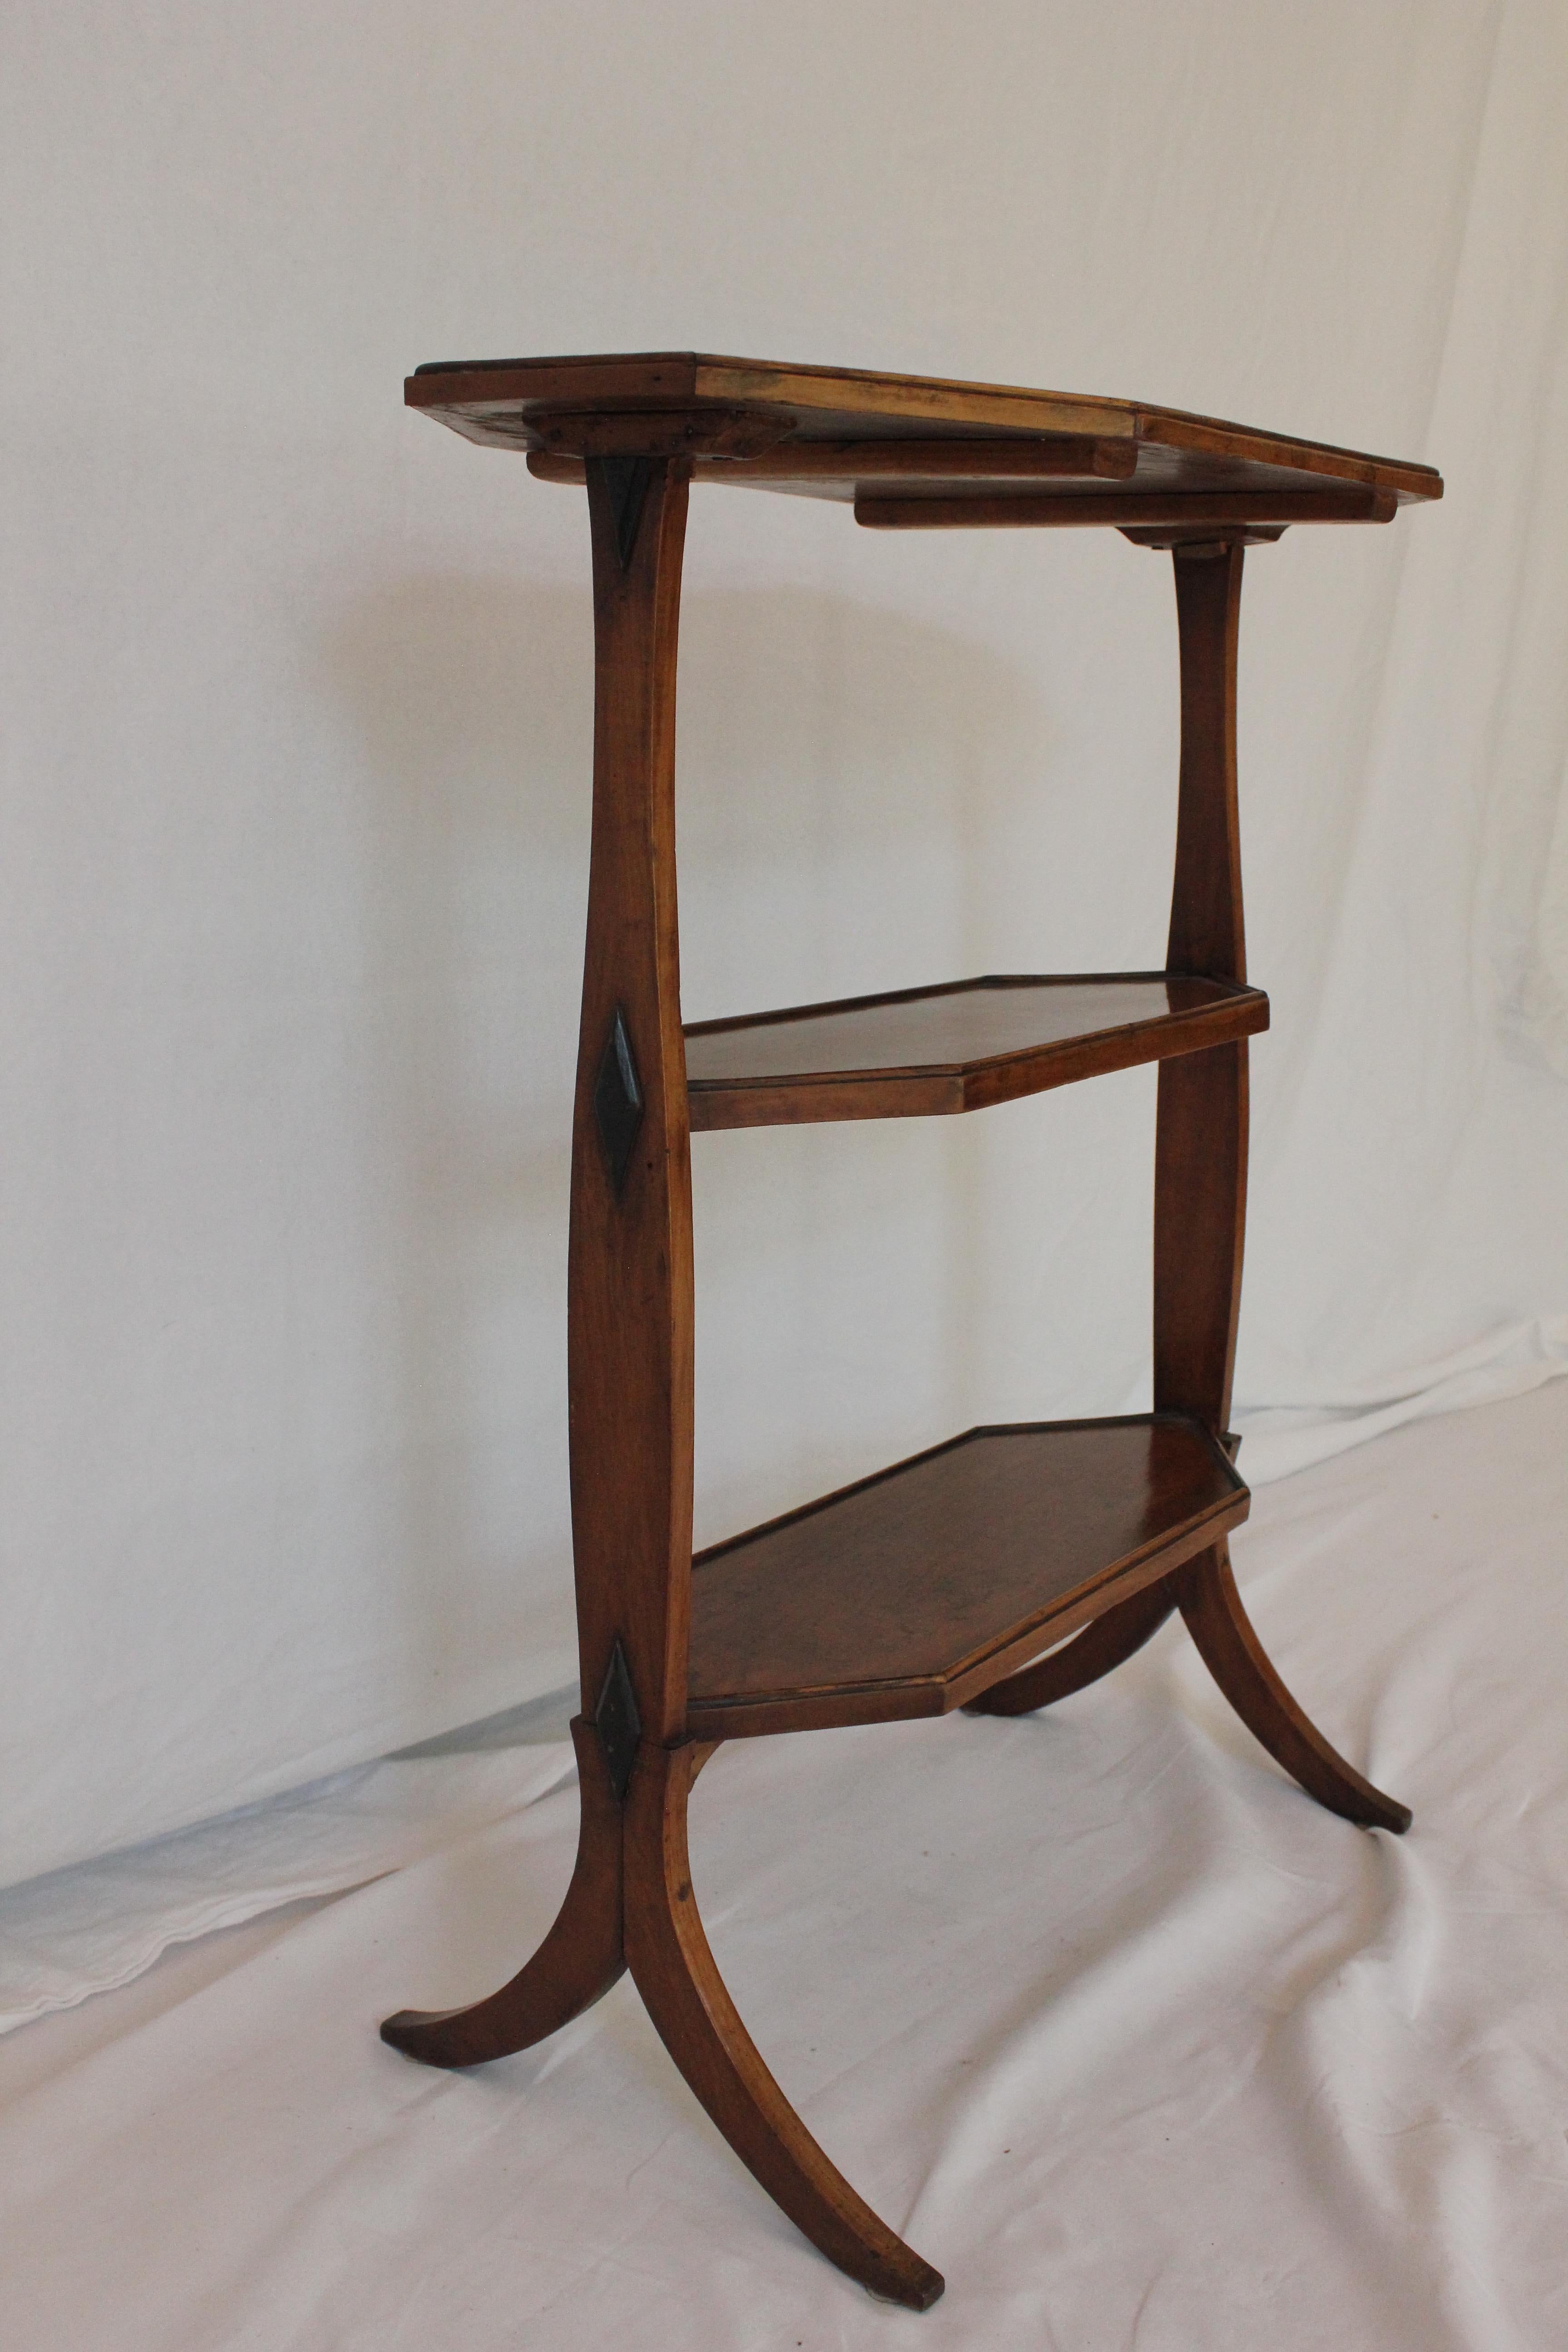 Antique French Provincial Fruitwood Side Table / Display Stand Late 18th C For Sale 2